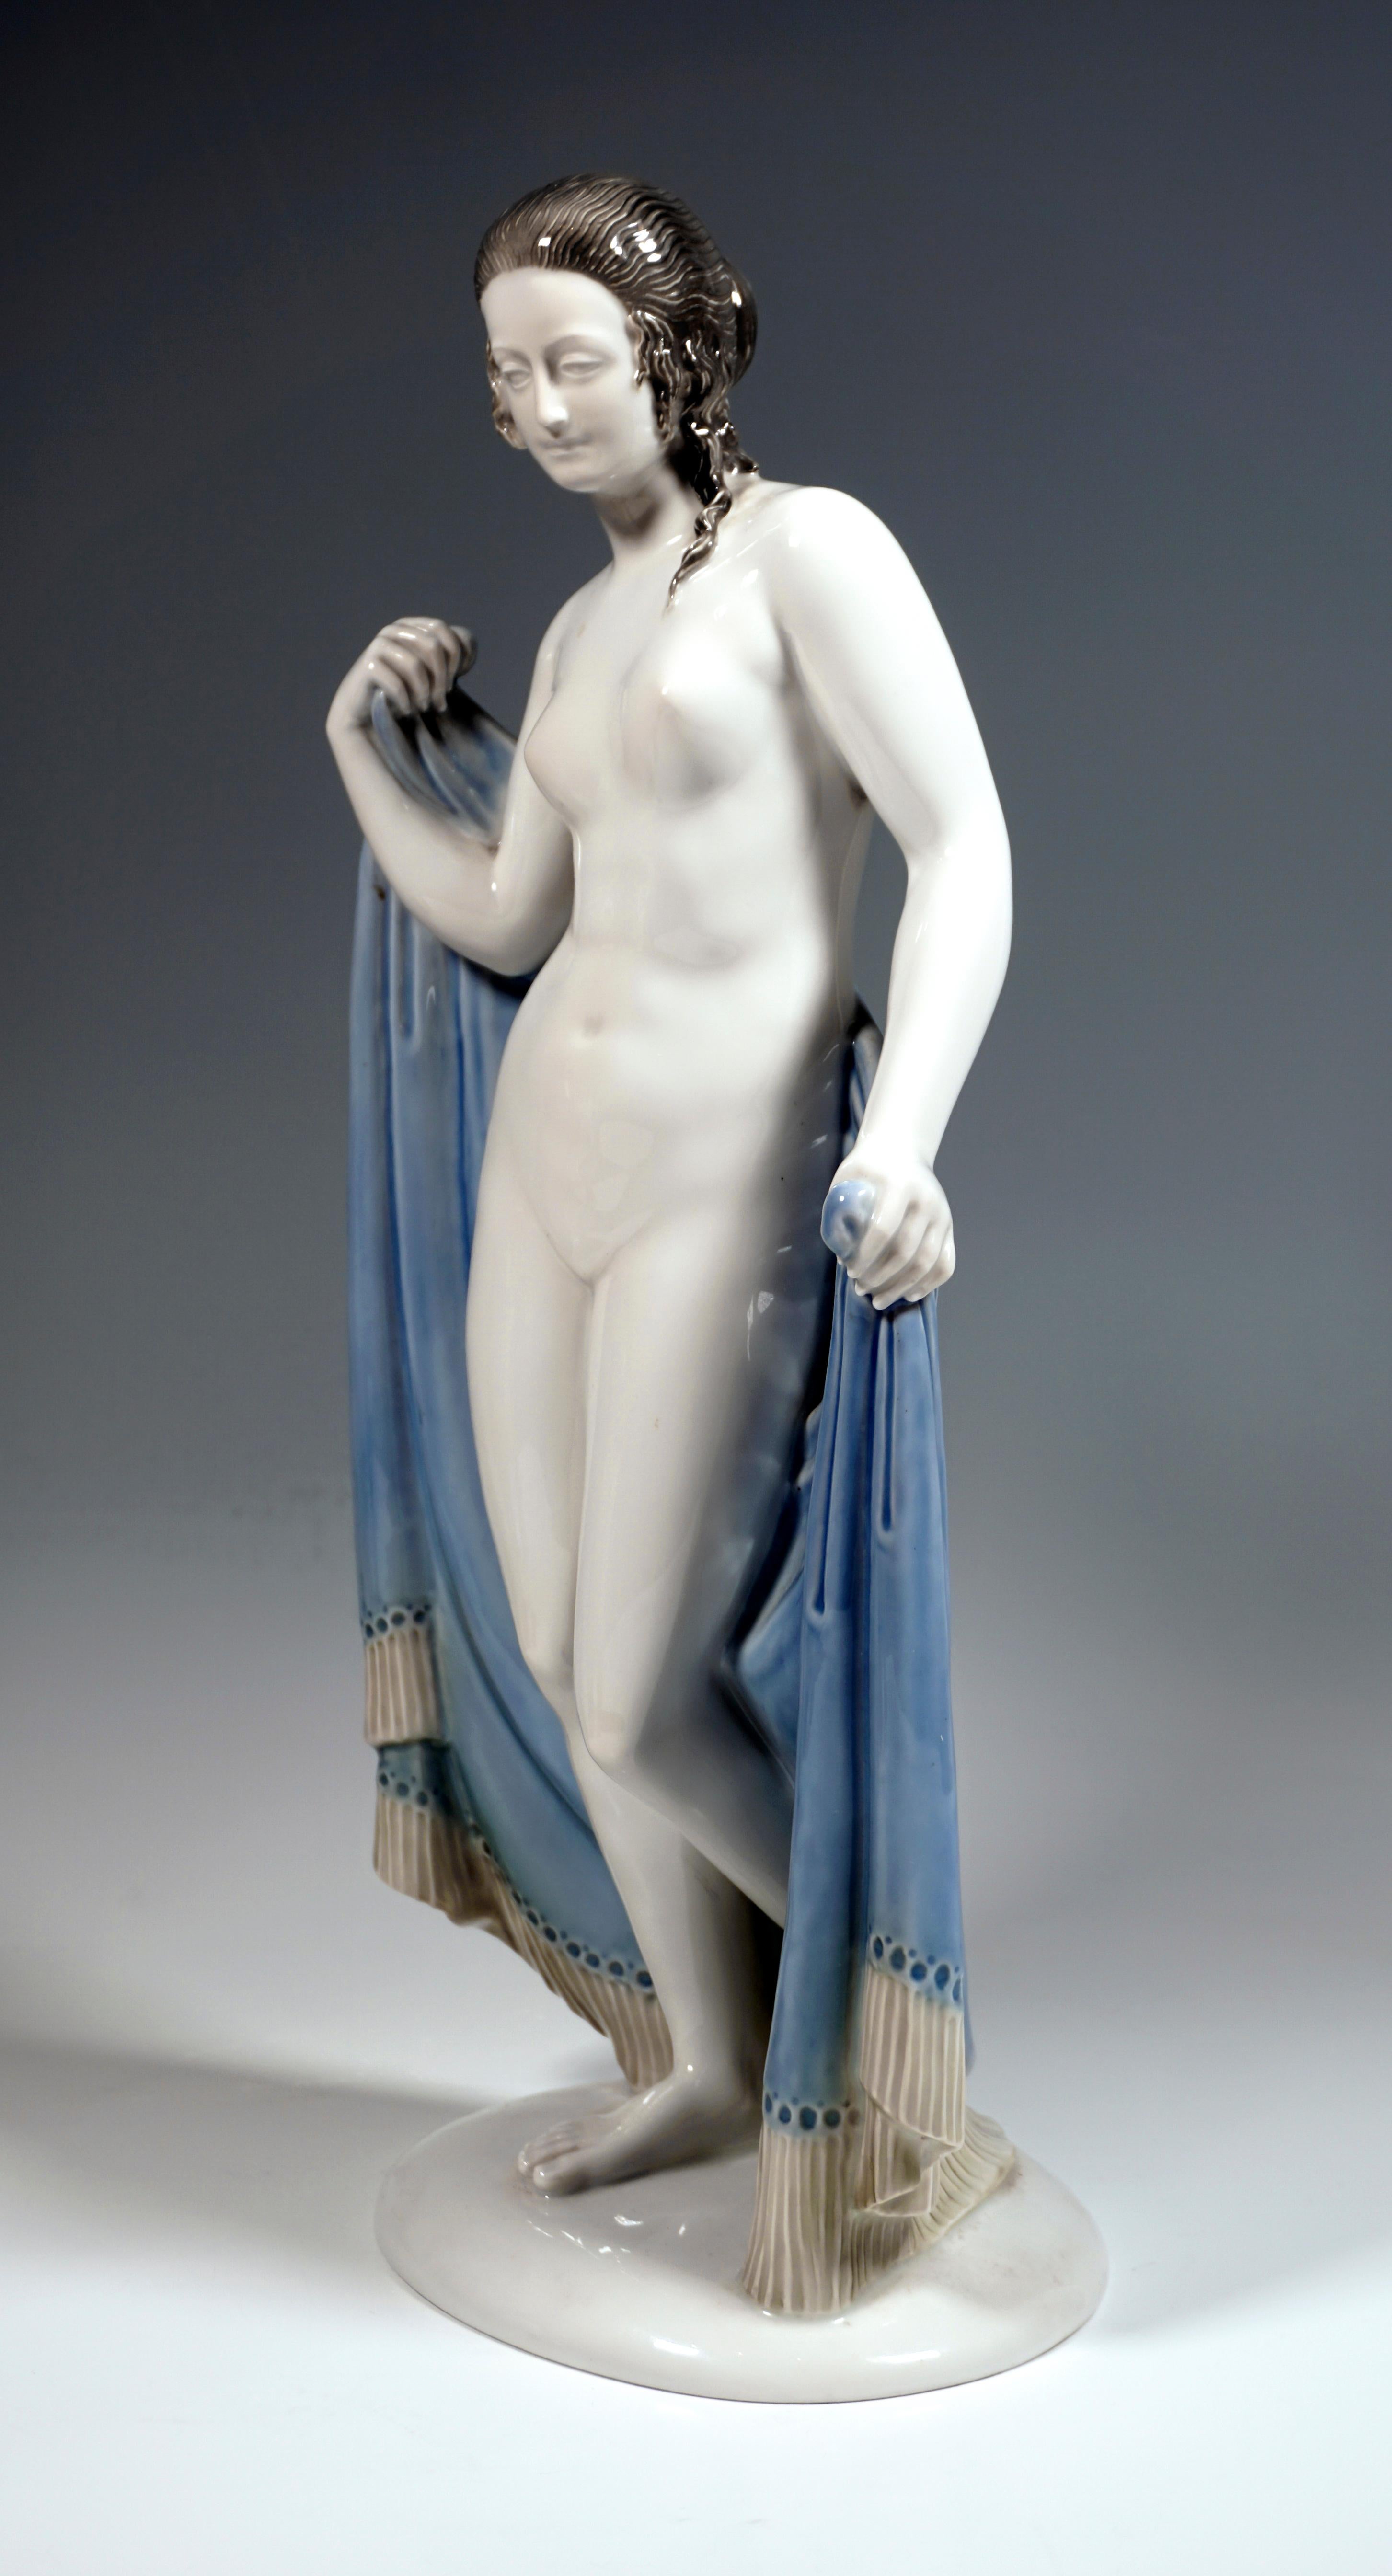 Hand-Crafted Porcelain Figurine 'After Bathing', by W.v. Heider, Rosenthal Selb Germany, 1927